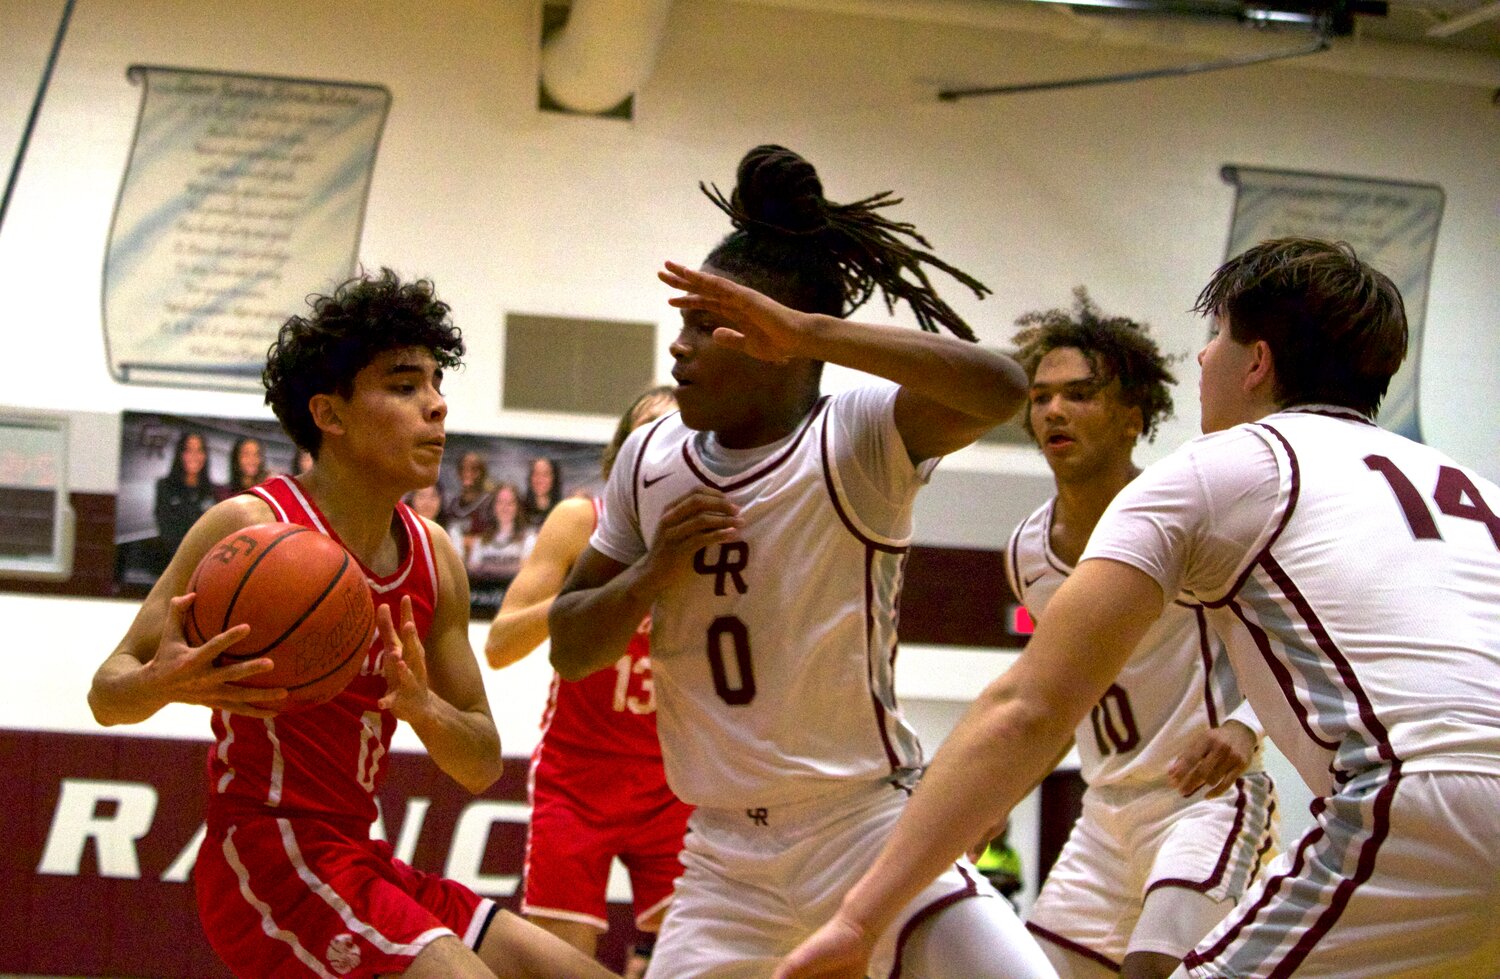 Greg Santos drives and looks for a teammate during Wednesday’s game between Katy and Cinco Ranch at the Cinco Ranch gym.